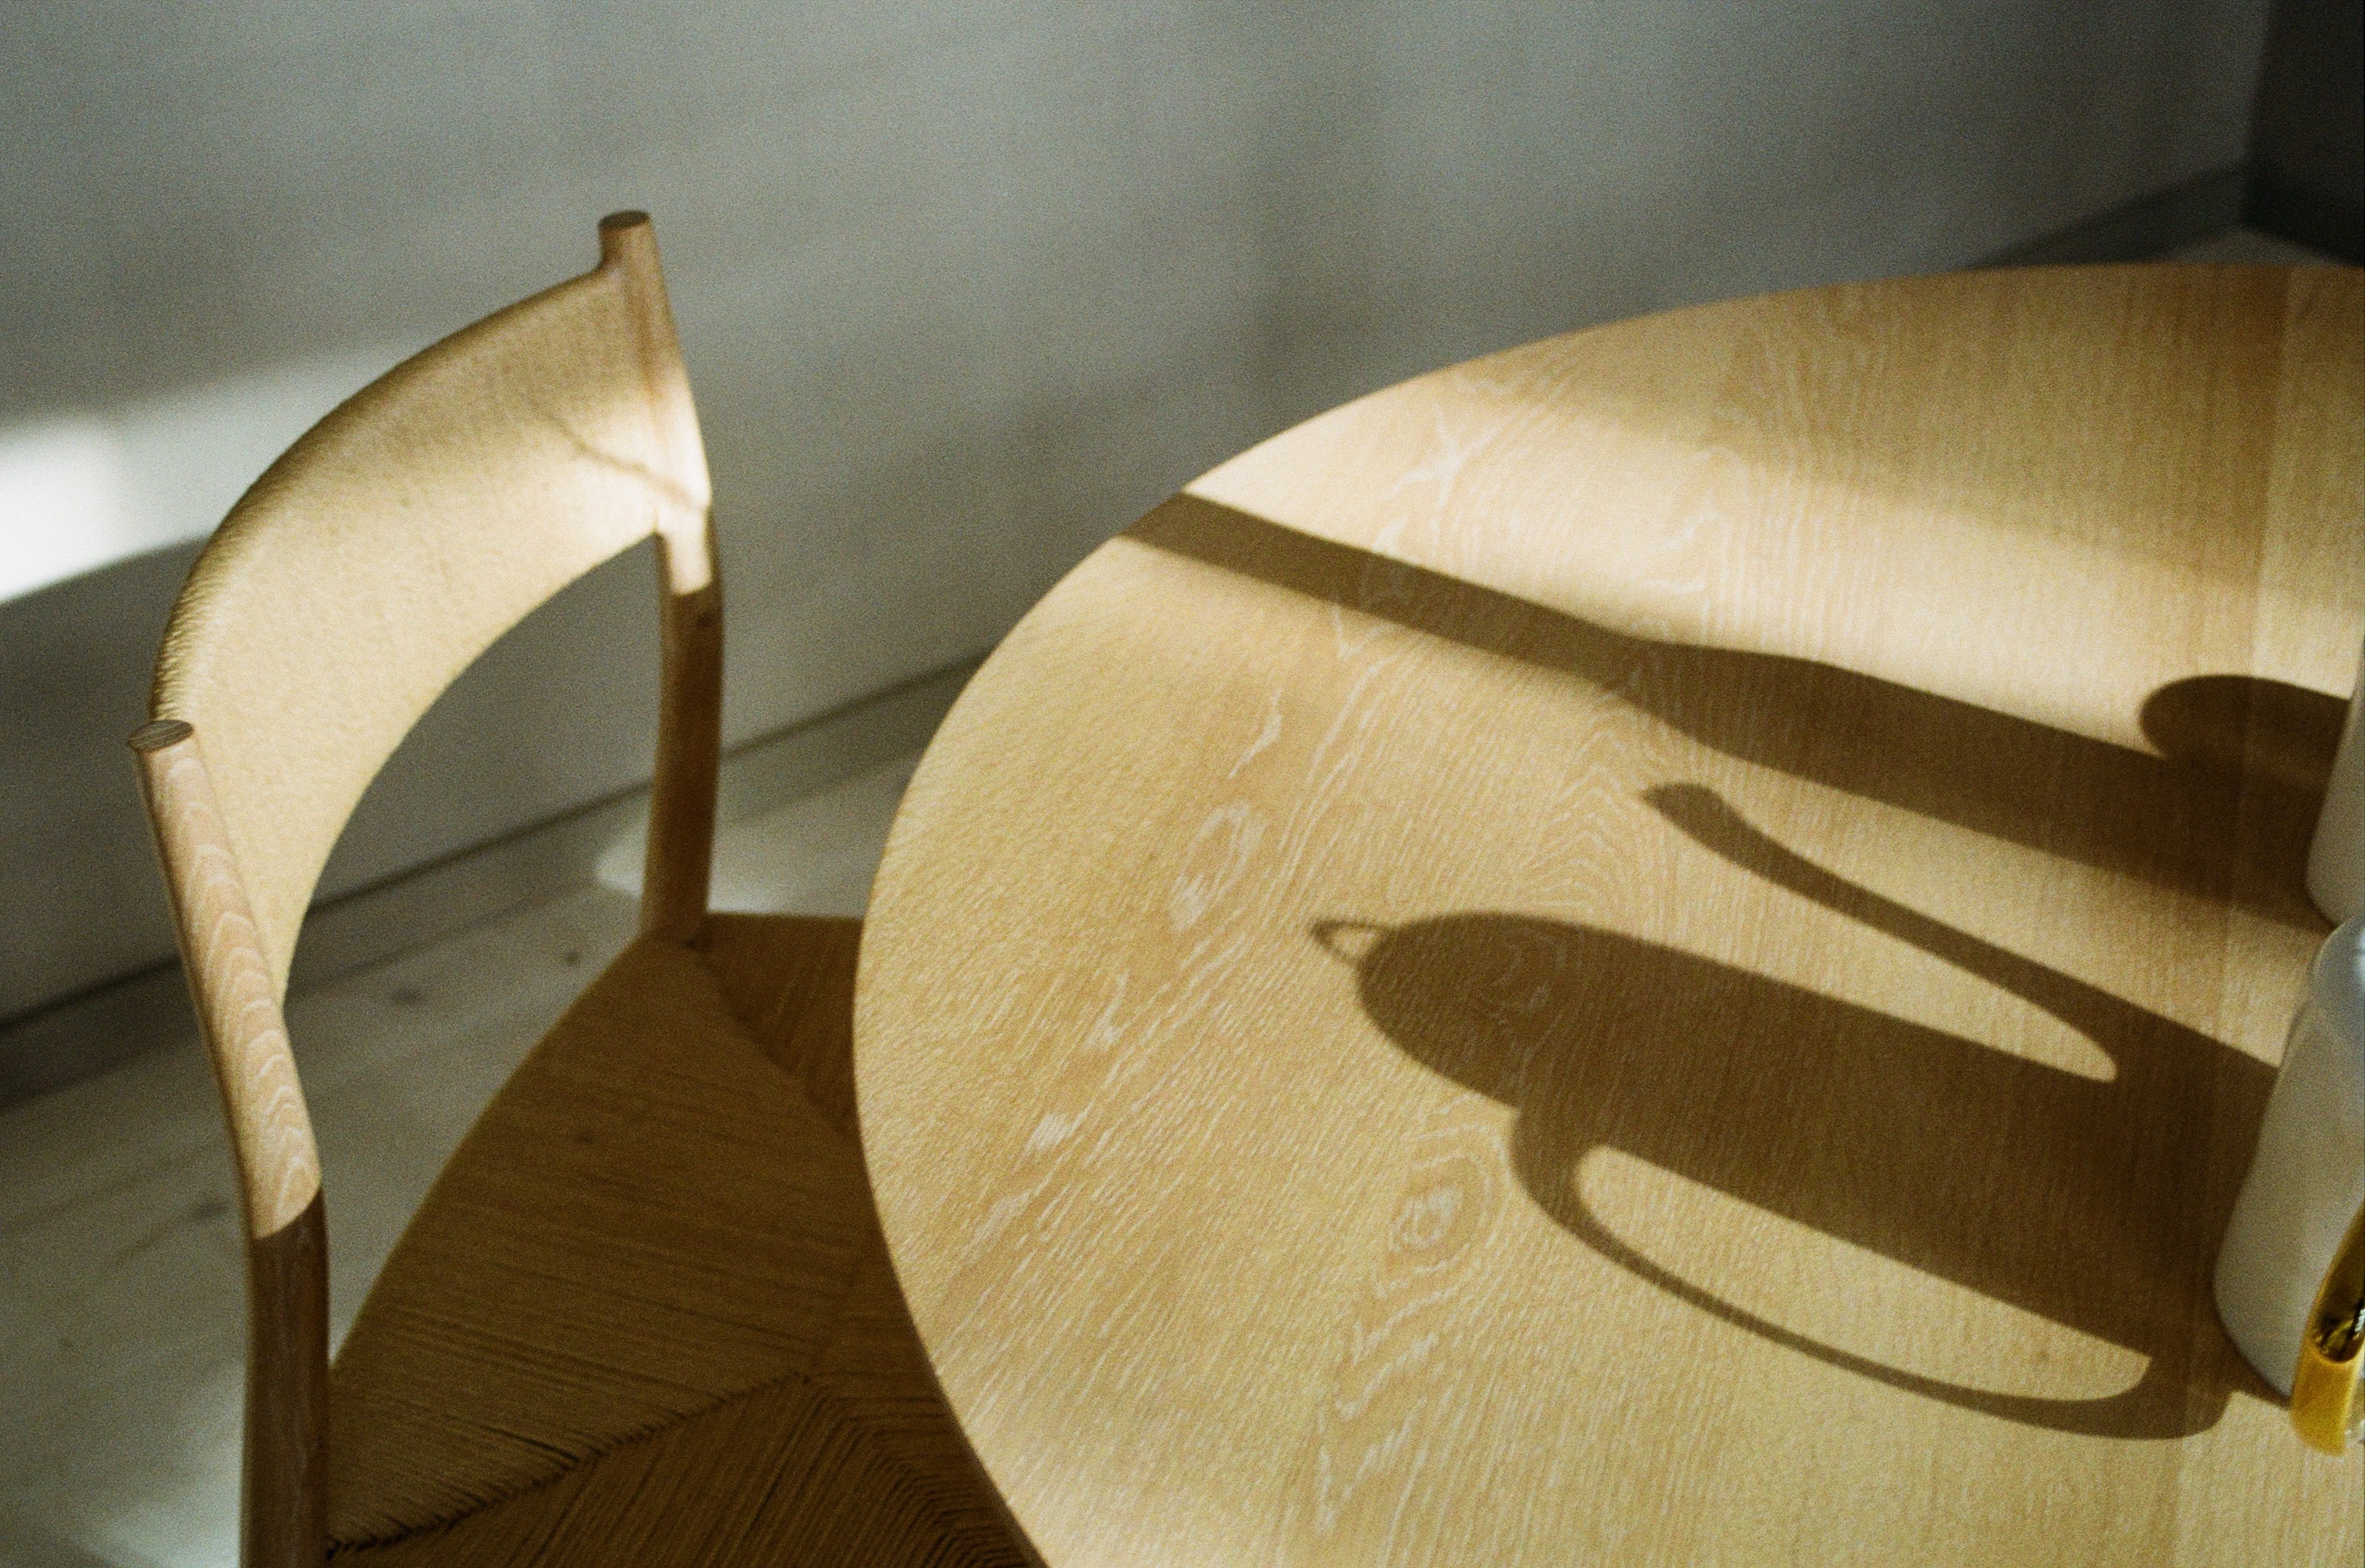 Image of sunlight on table showing how to keep home cool